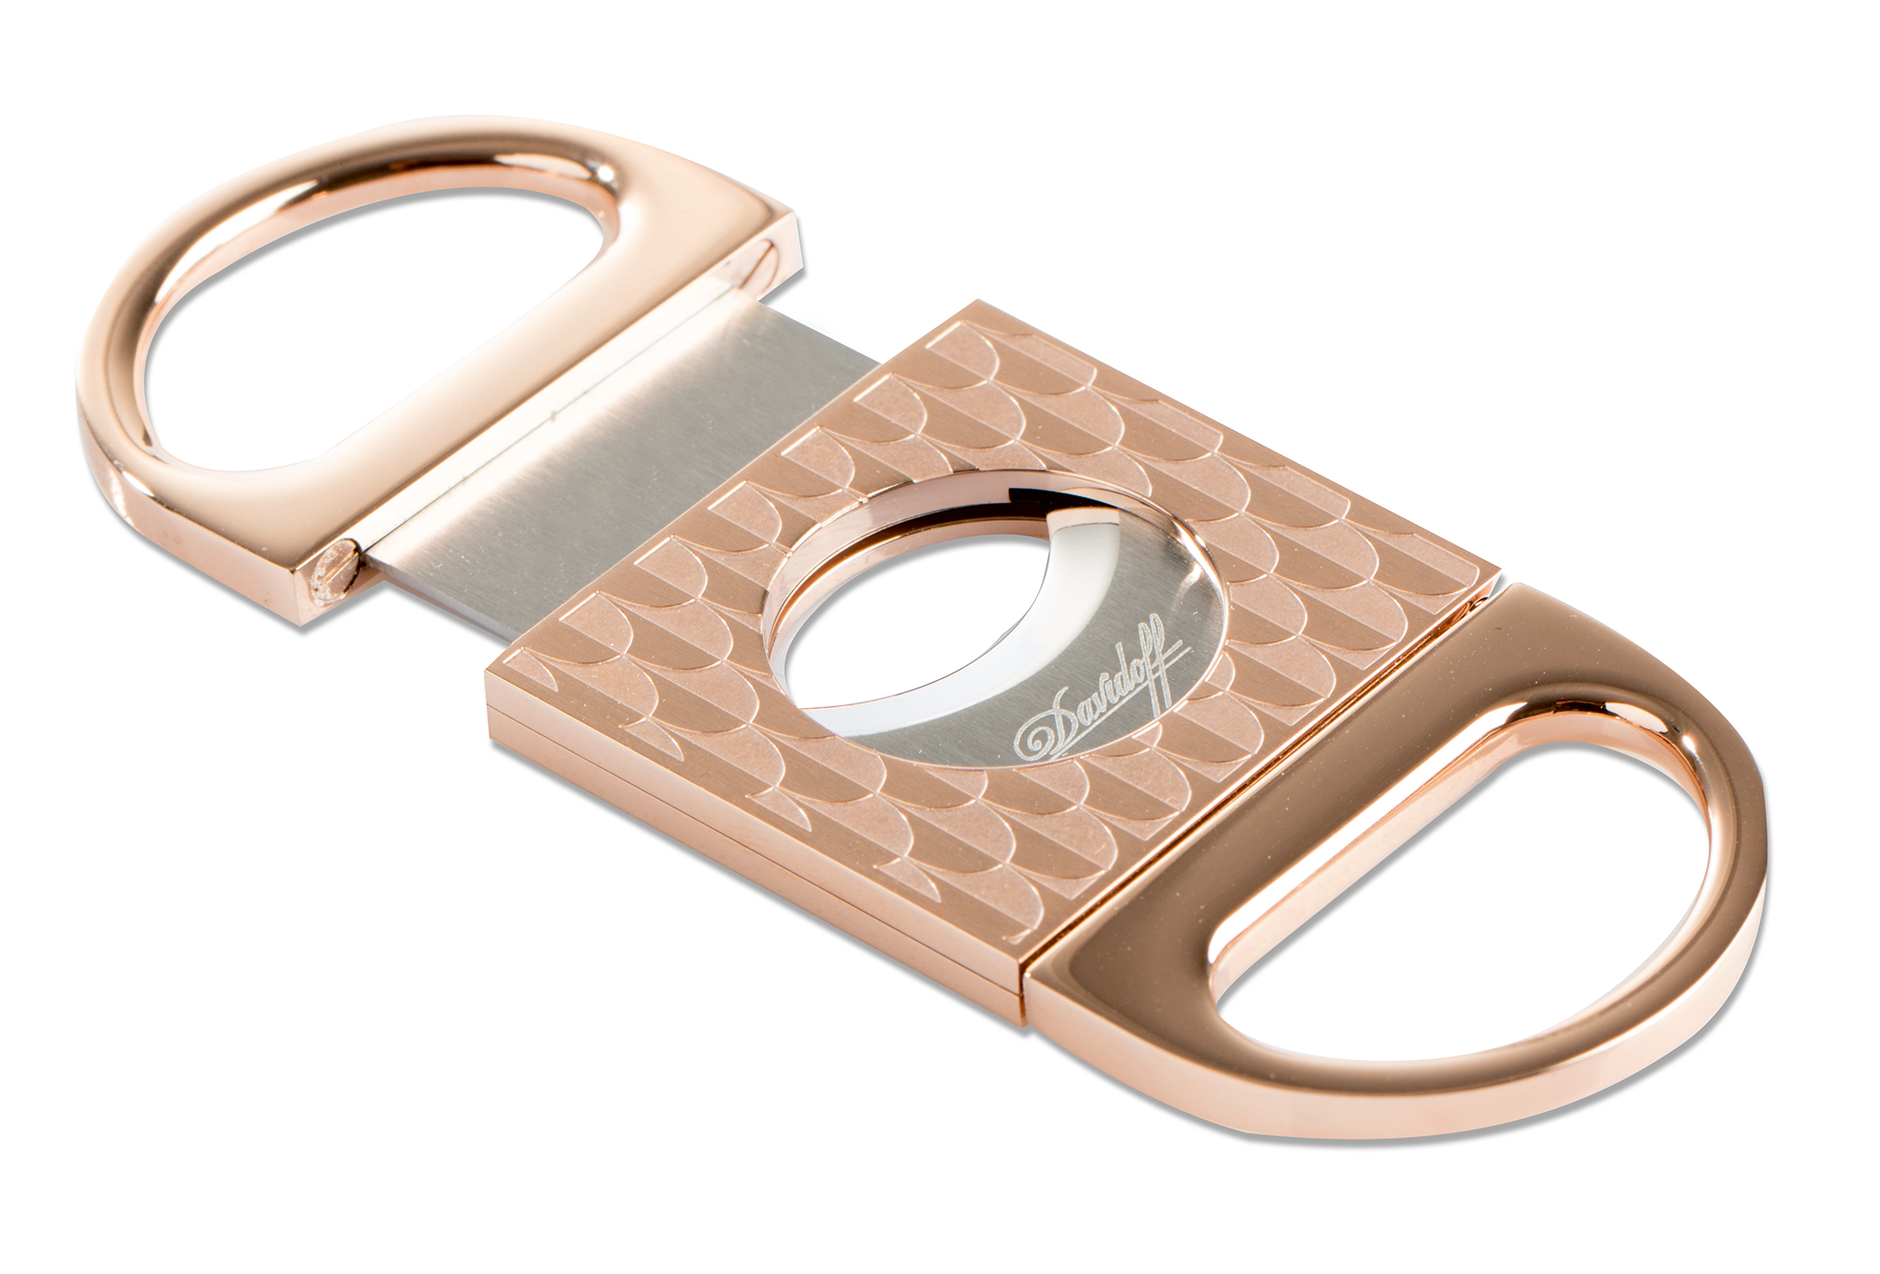 davidoff-year-of-the-rooster-double-blade-cutter-rose-gold-003